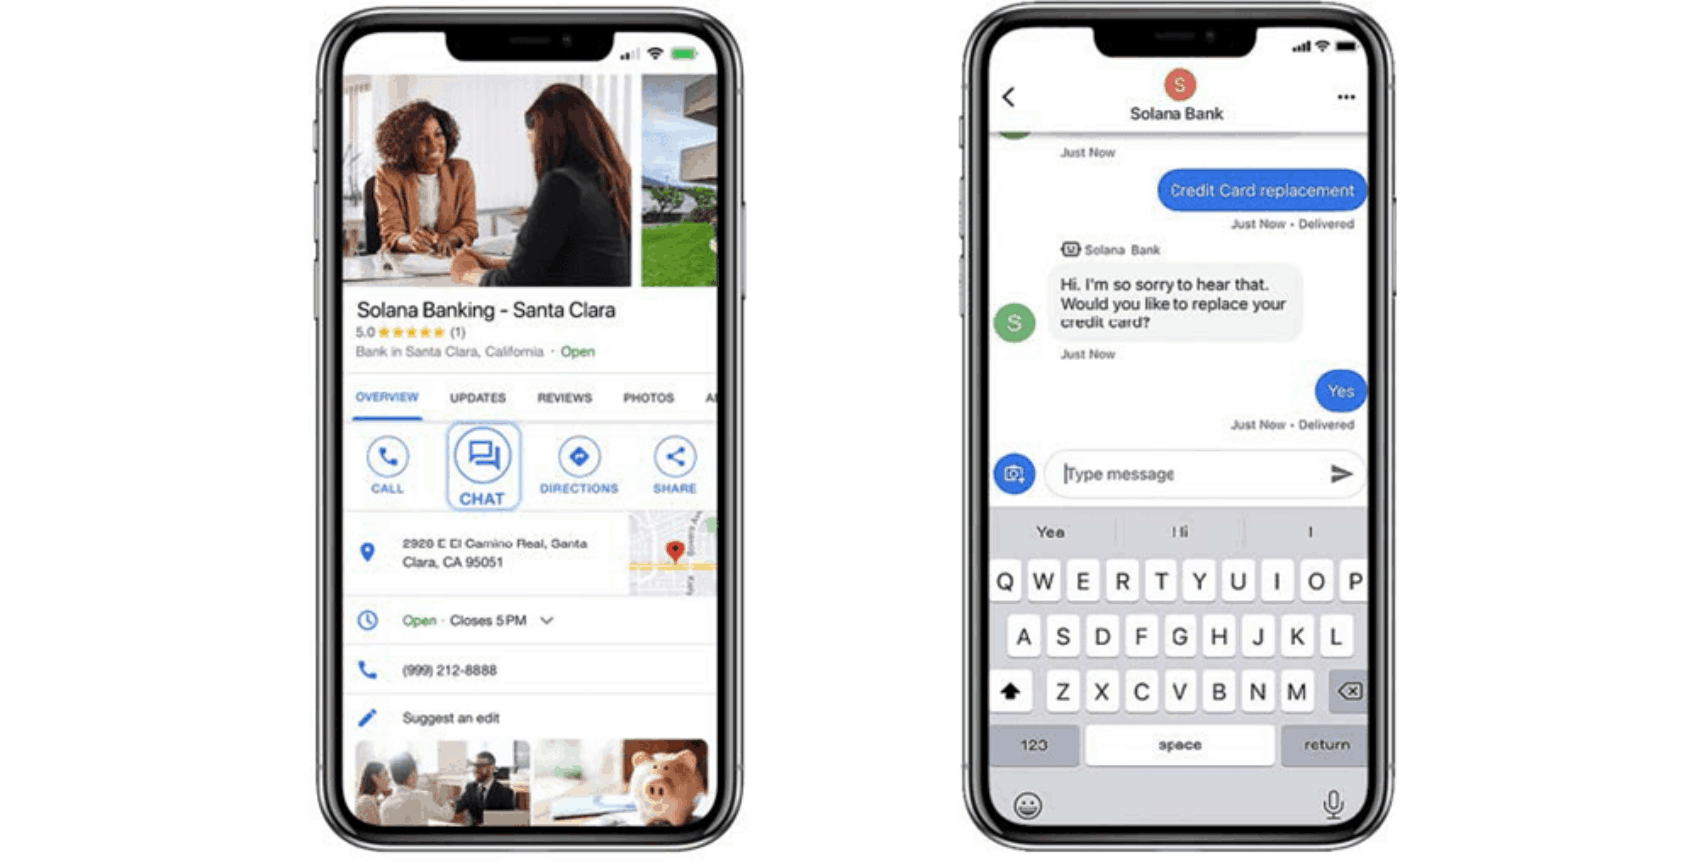 Two phones side by side show an interaction between a customer and a live agent using the new chat function available in Google business listings for ServiceNow customers.